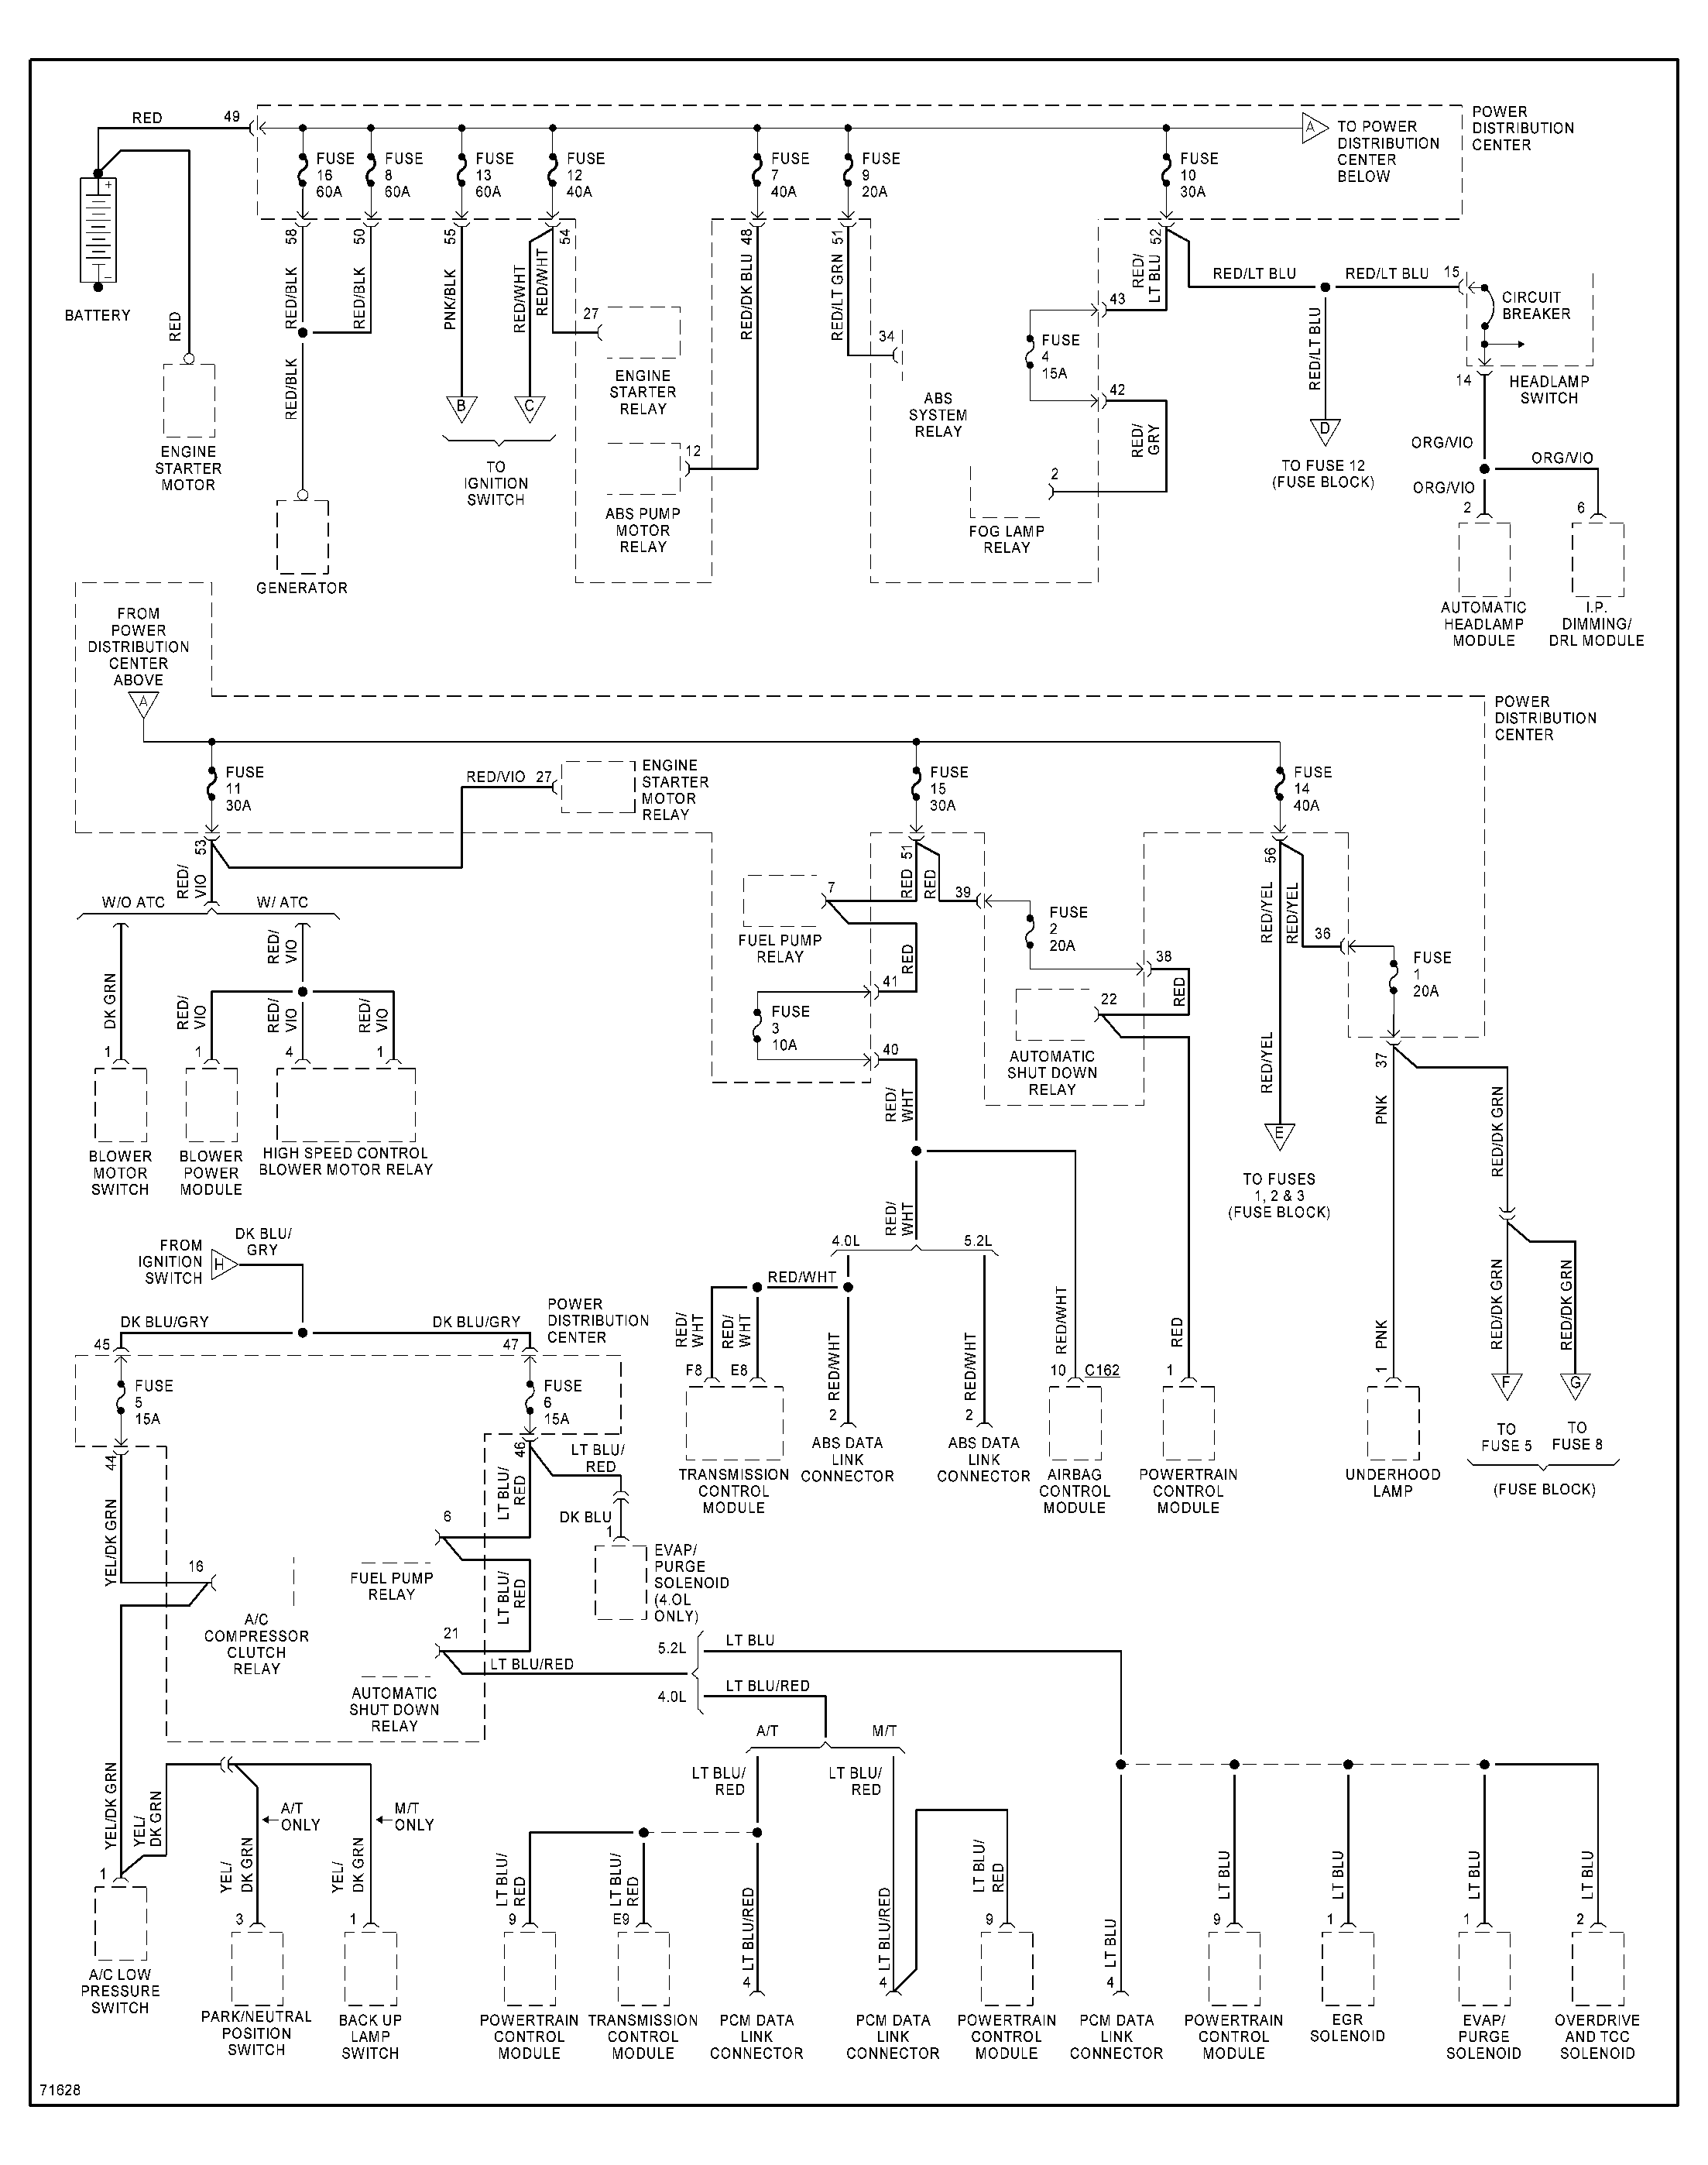 1995 Jeep Yj Fuse Box Diagram : Where do you find a diagram of the fuse